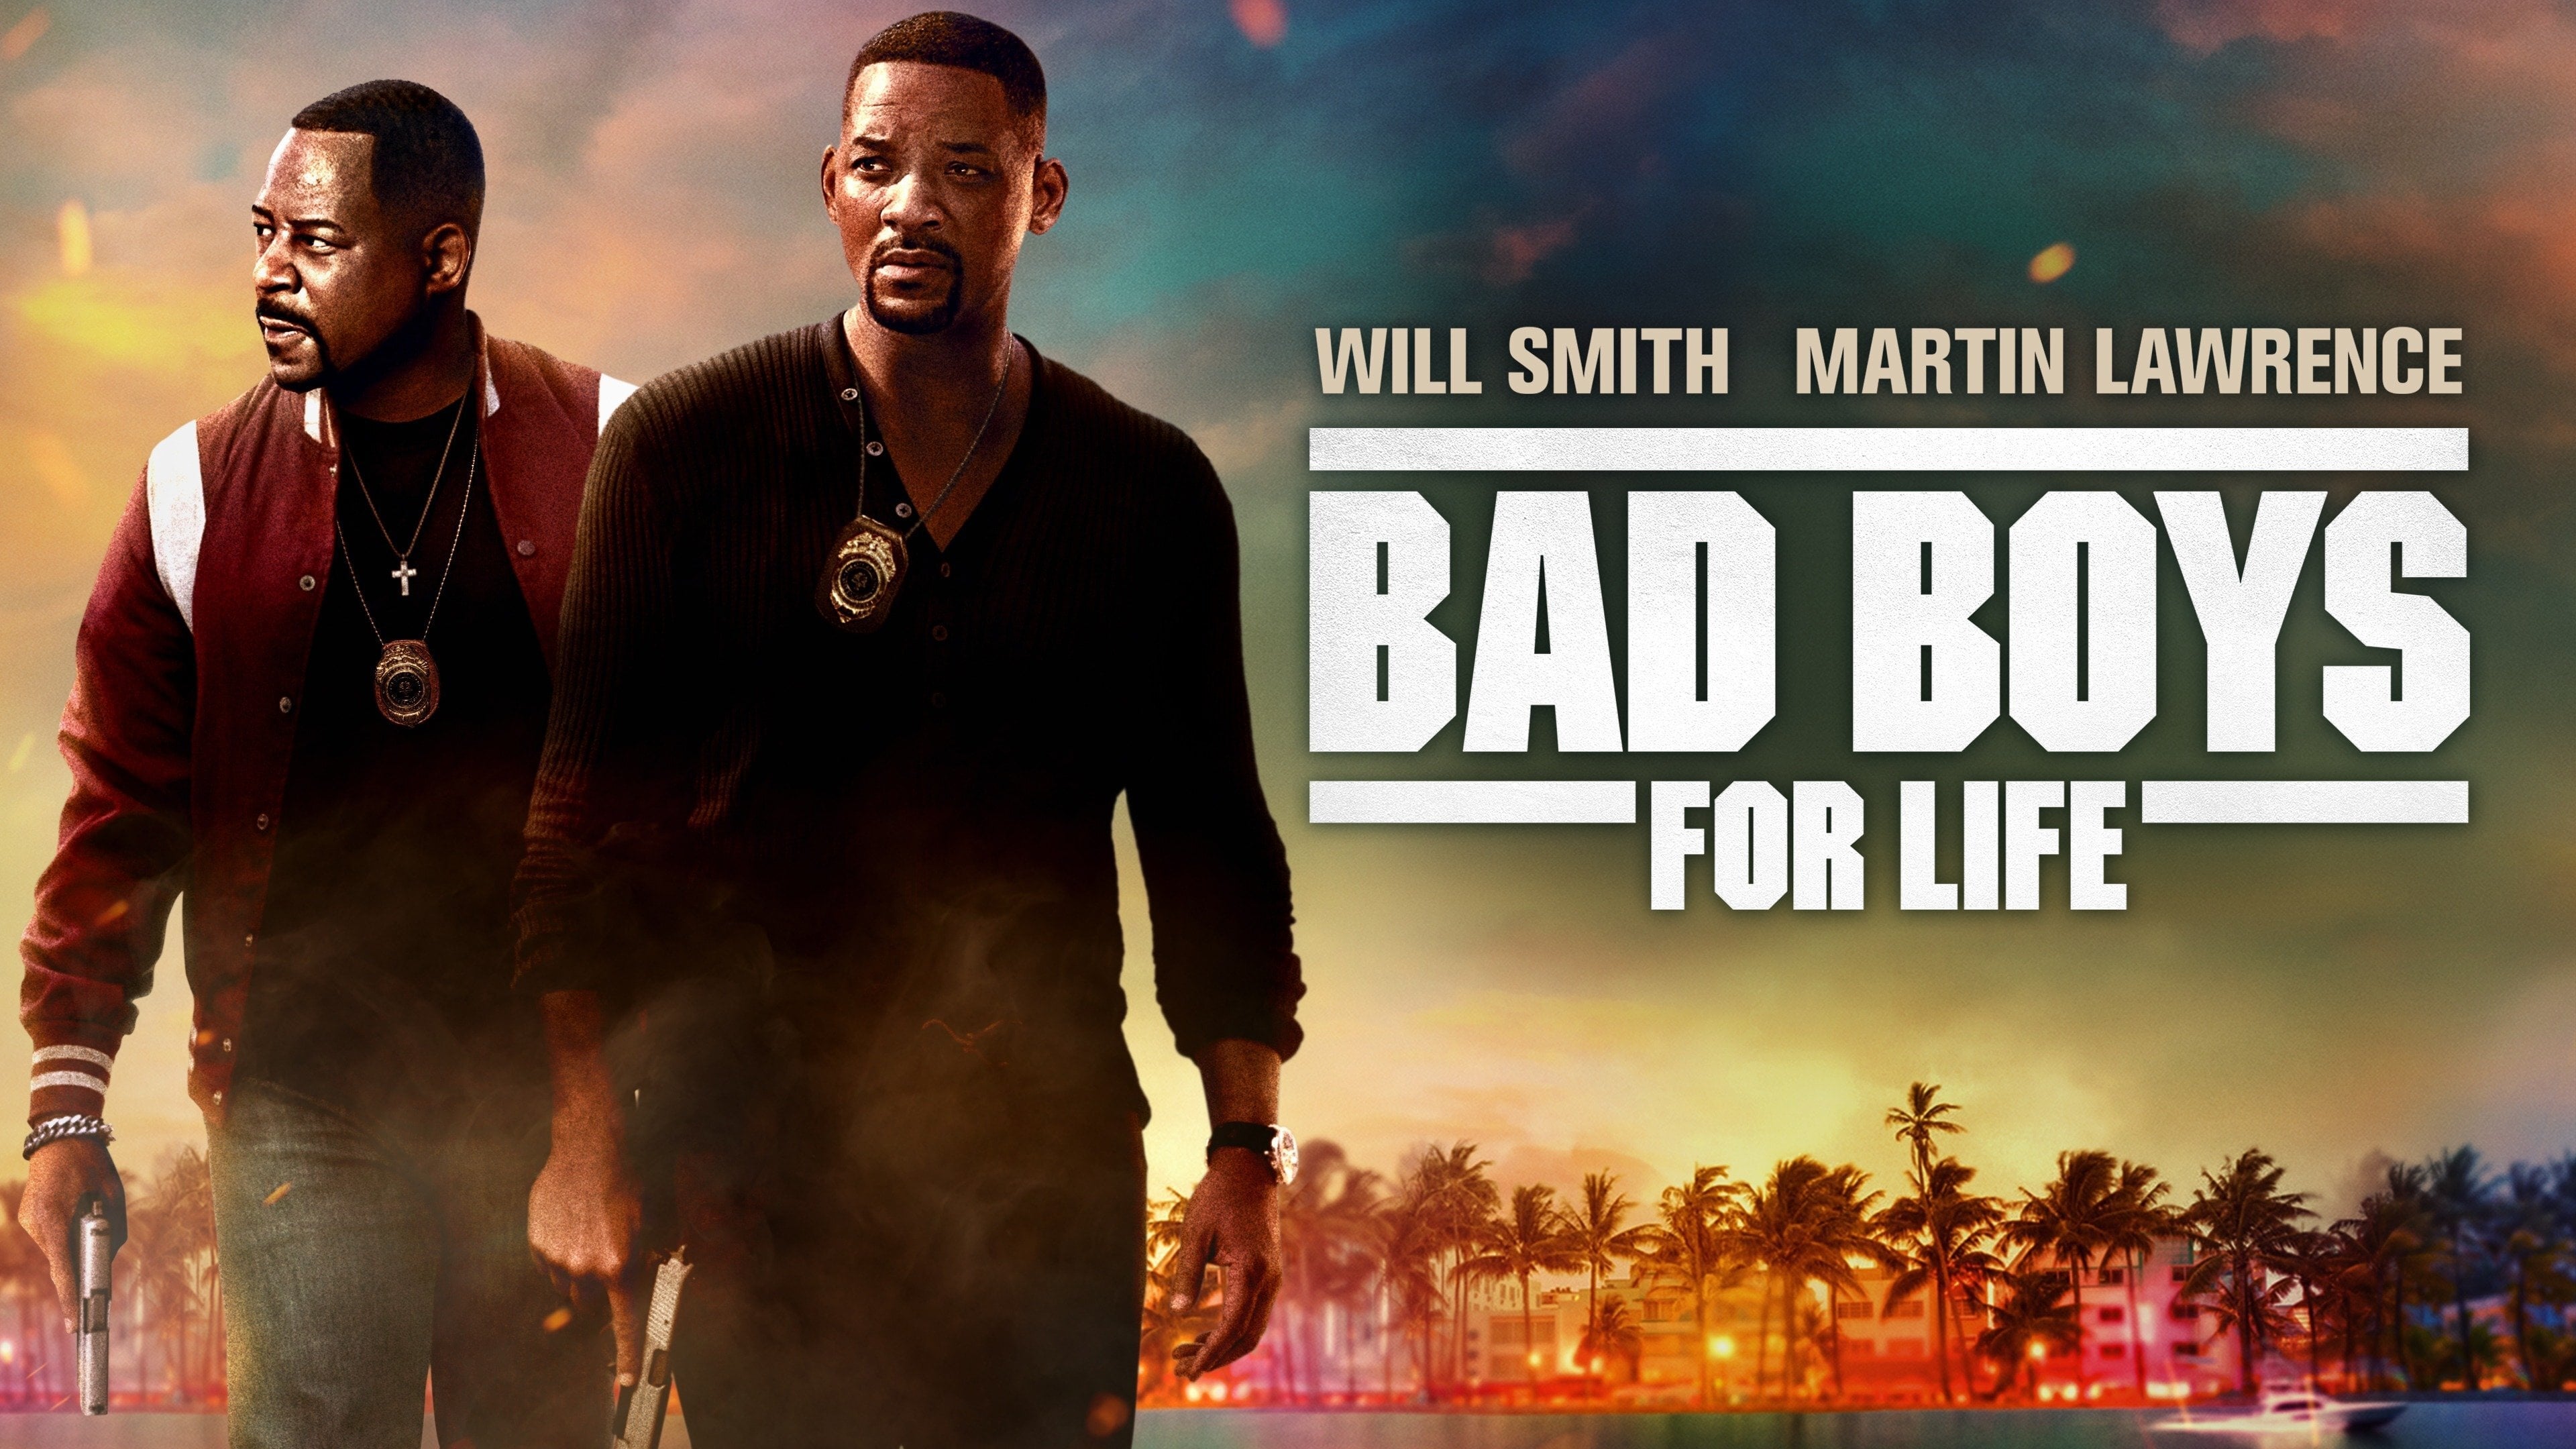 Bad boys for life free download download entire spotify playlist to mp3